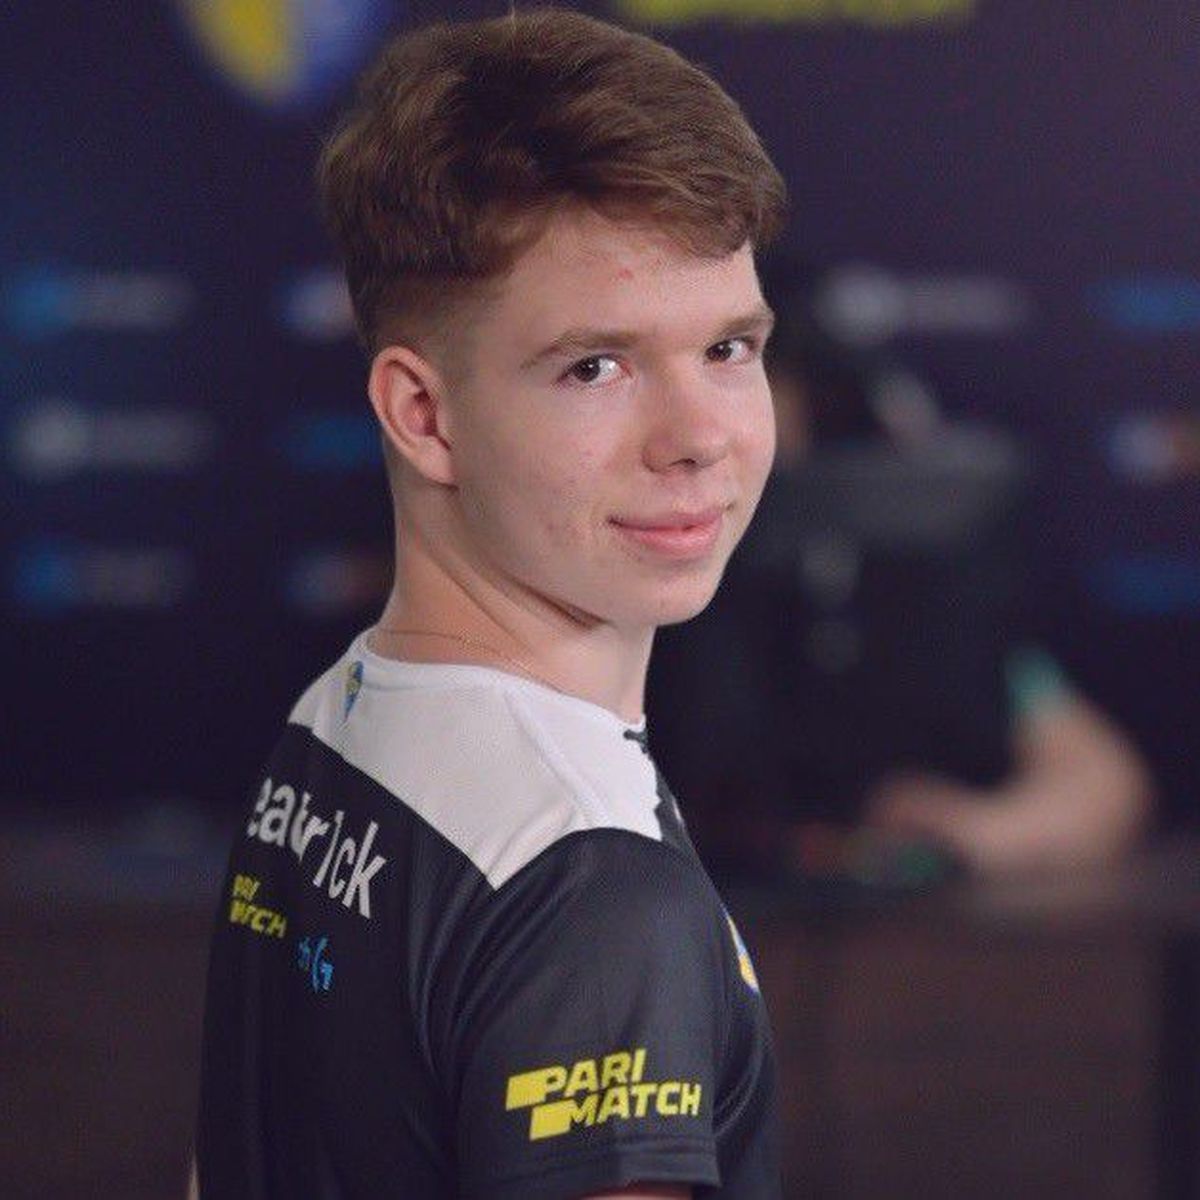 Headtr1ck On Getting Into NAVI Junior, The Show Match With s1mple And His Idols